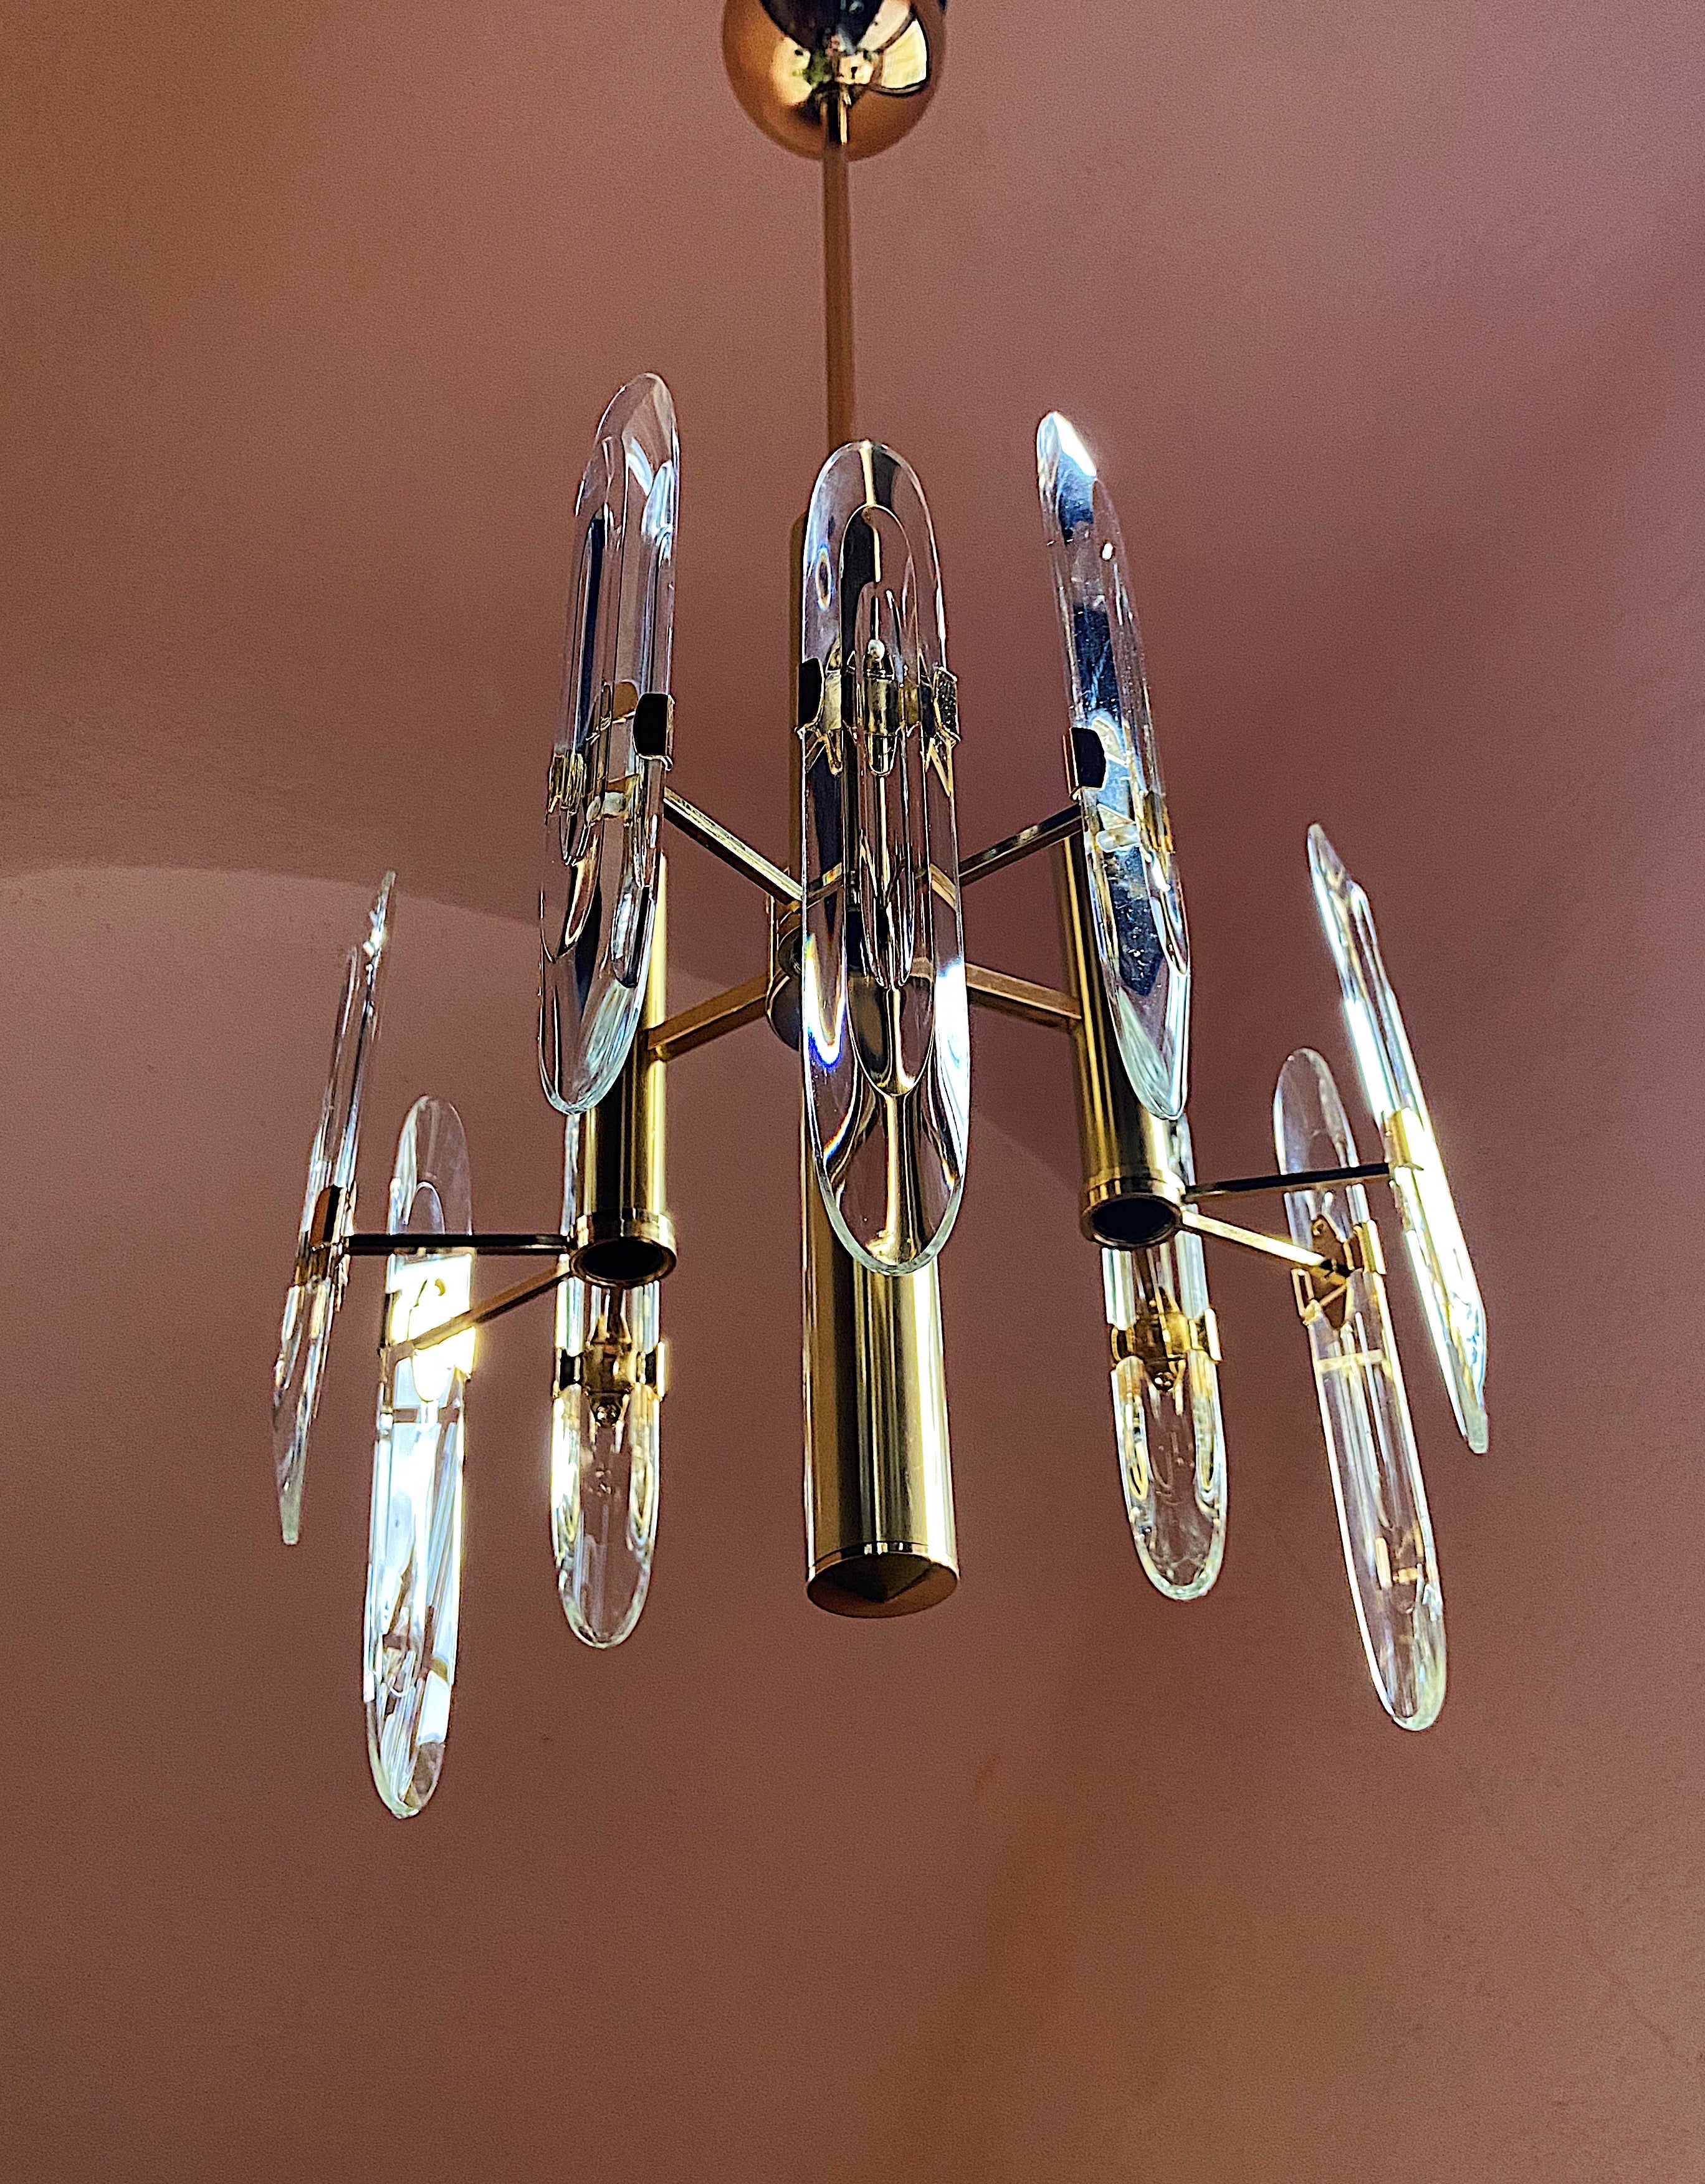 Gorgeous 3 armed chandelier by Gaetano Sciolari, 1970s, Italy.
9 crystal glasses set on a metal base. 3 light sockets.

Details
Creator: Gaetano Sciolari (Designer)
Dimensions: height: 95 cm width: 36 cm
Materials and Techniques: Chrome,